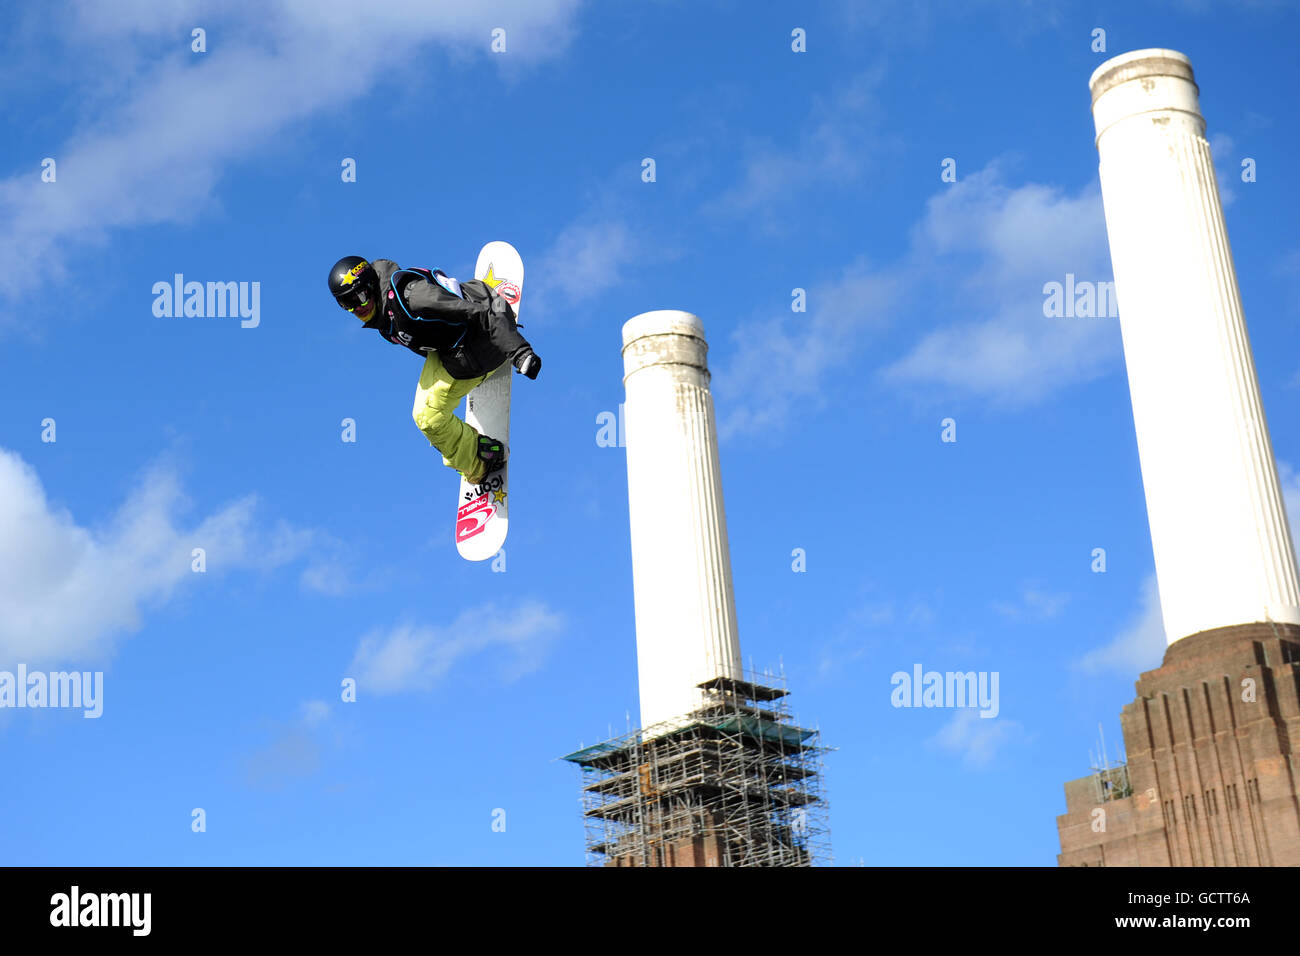 Fabian Fassnacht of Switzerland during the LG Snowboard FIS World Cup in London Stock Photo